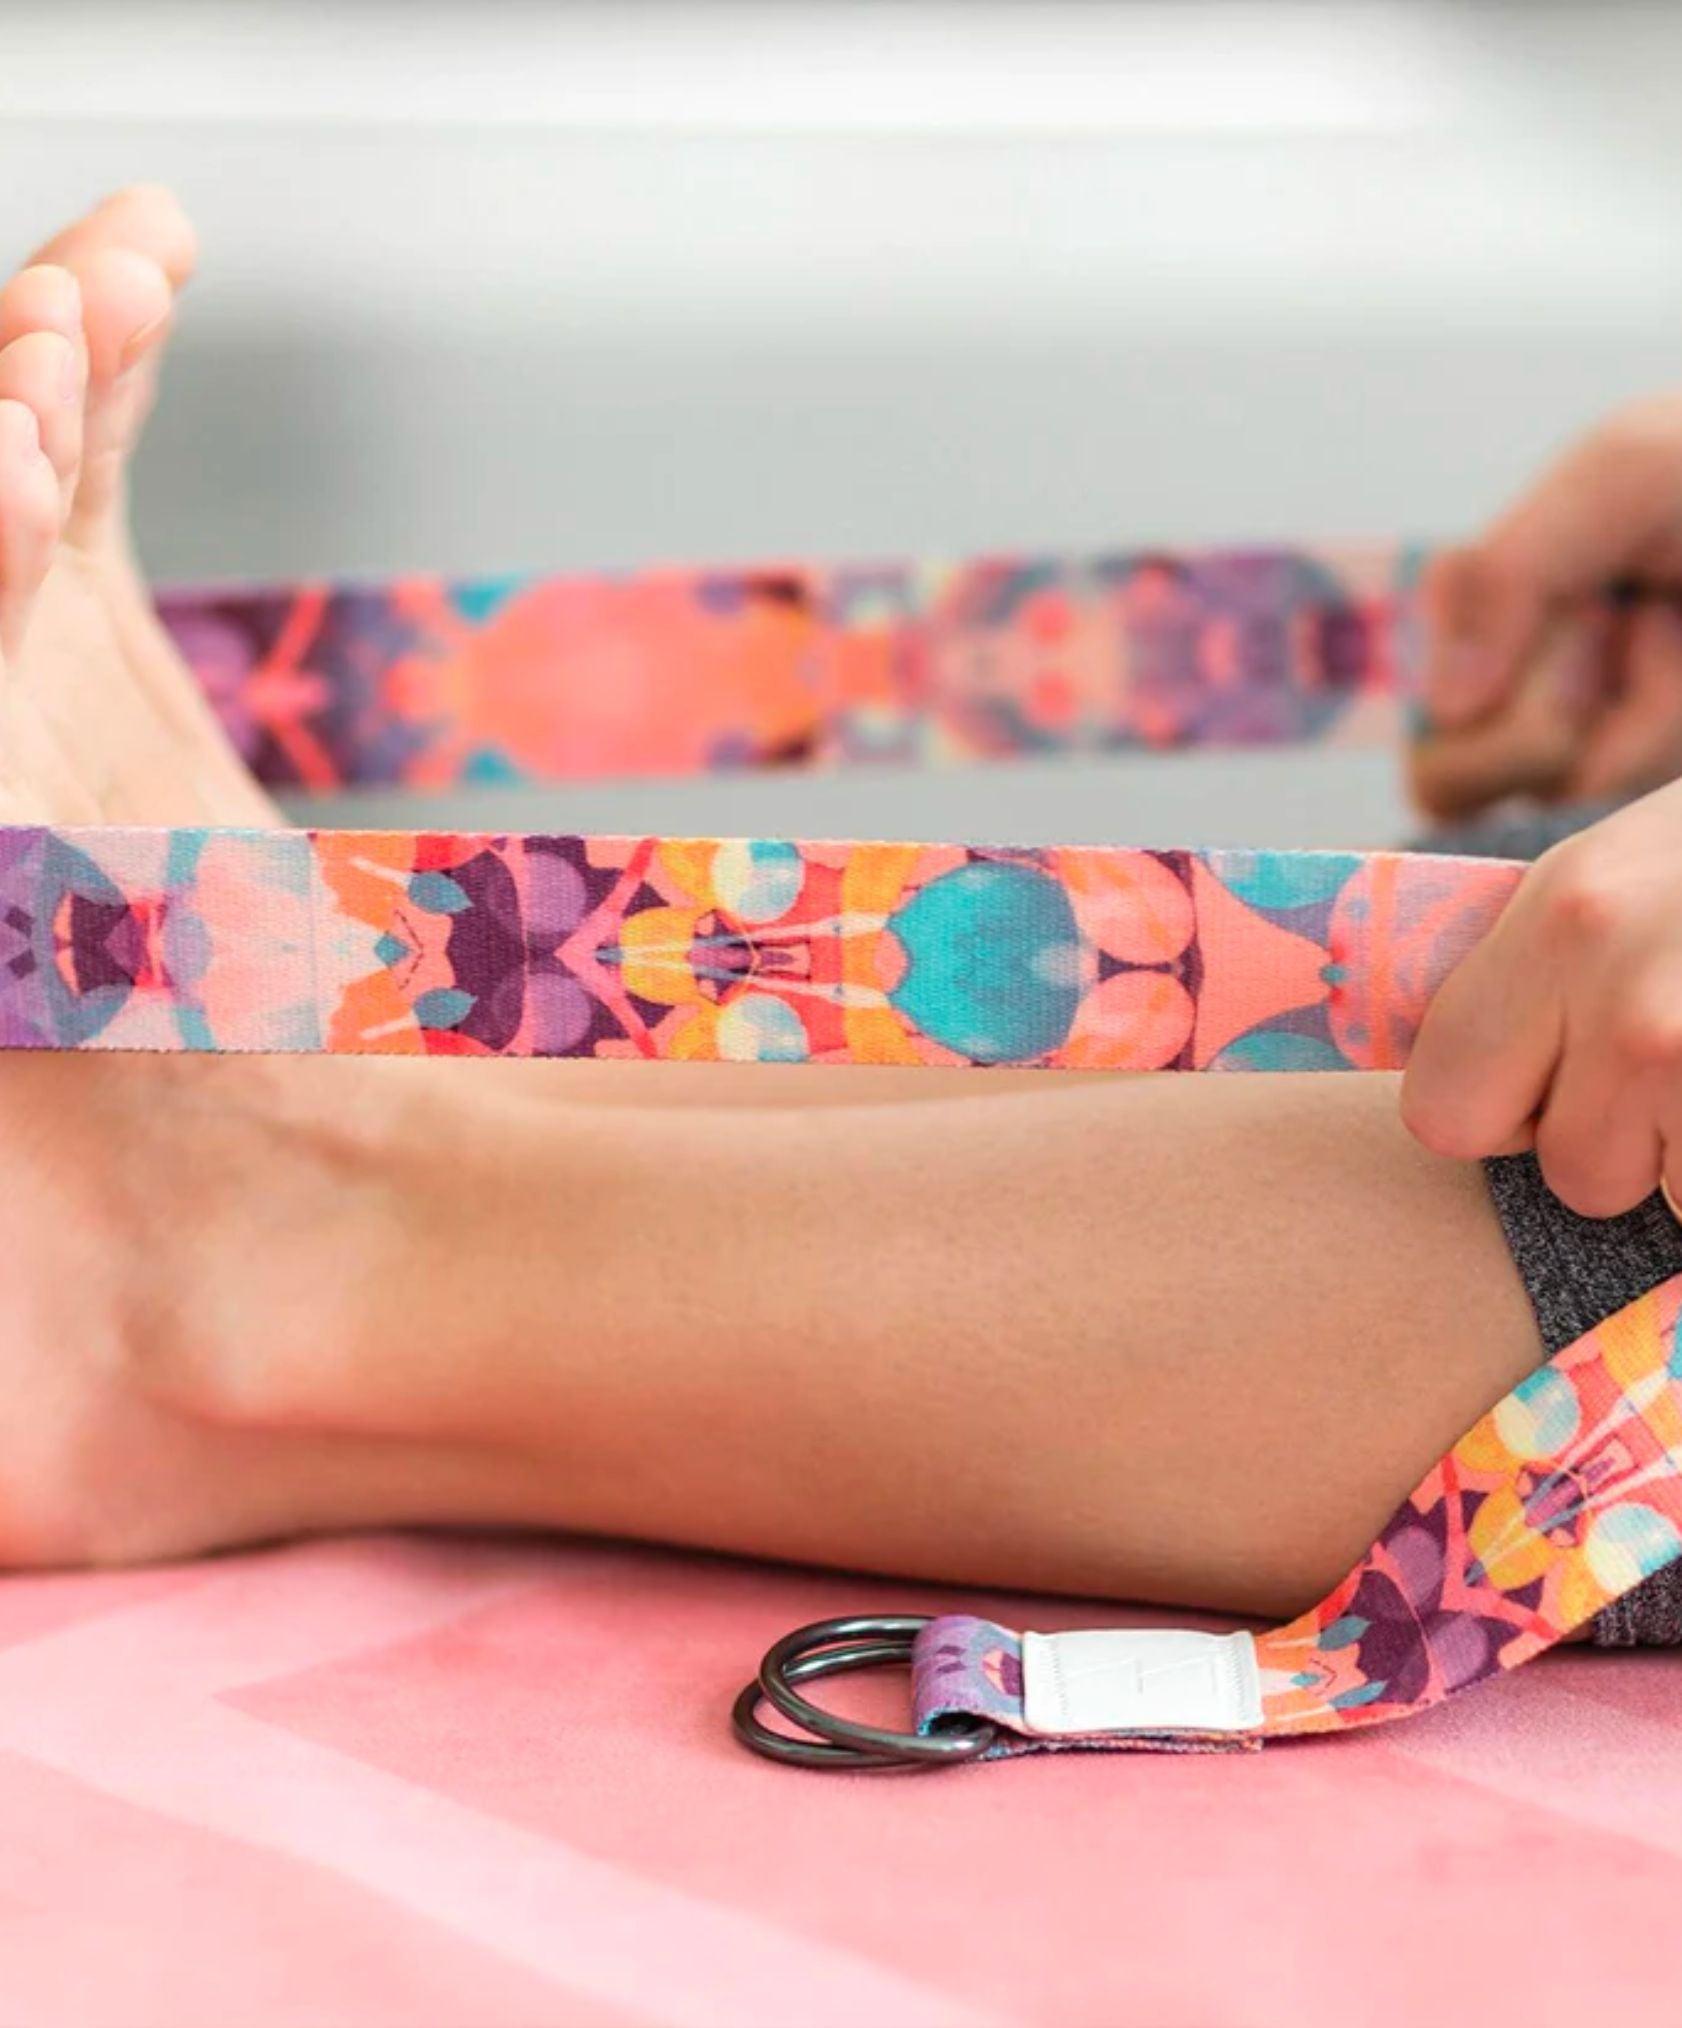 YDL Yoga Strap - Best For Stretching, Pilates, Physical Therapy - Yoga Design Lab 